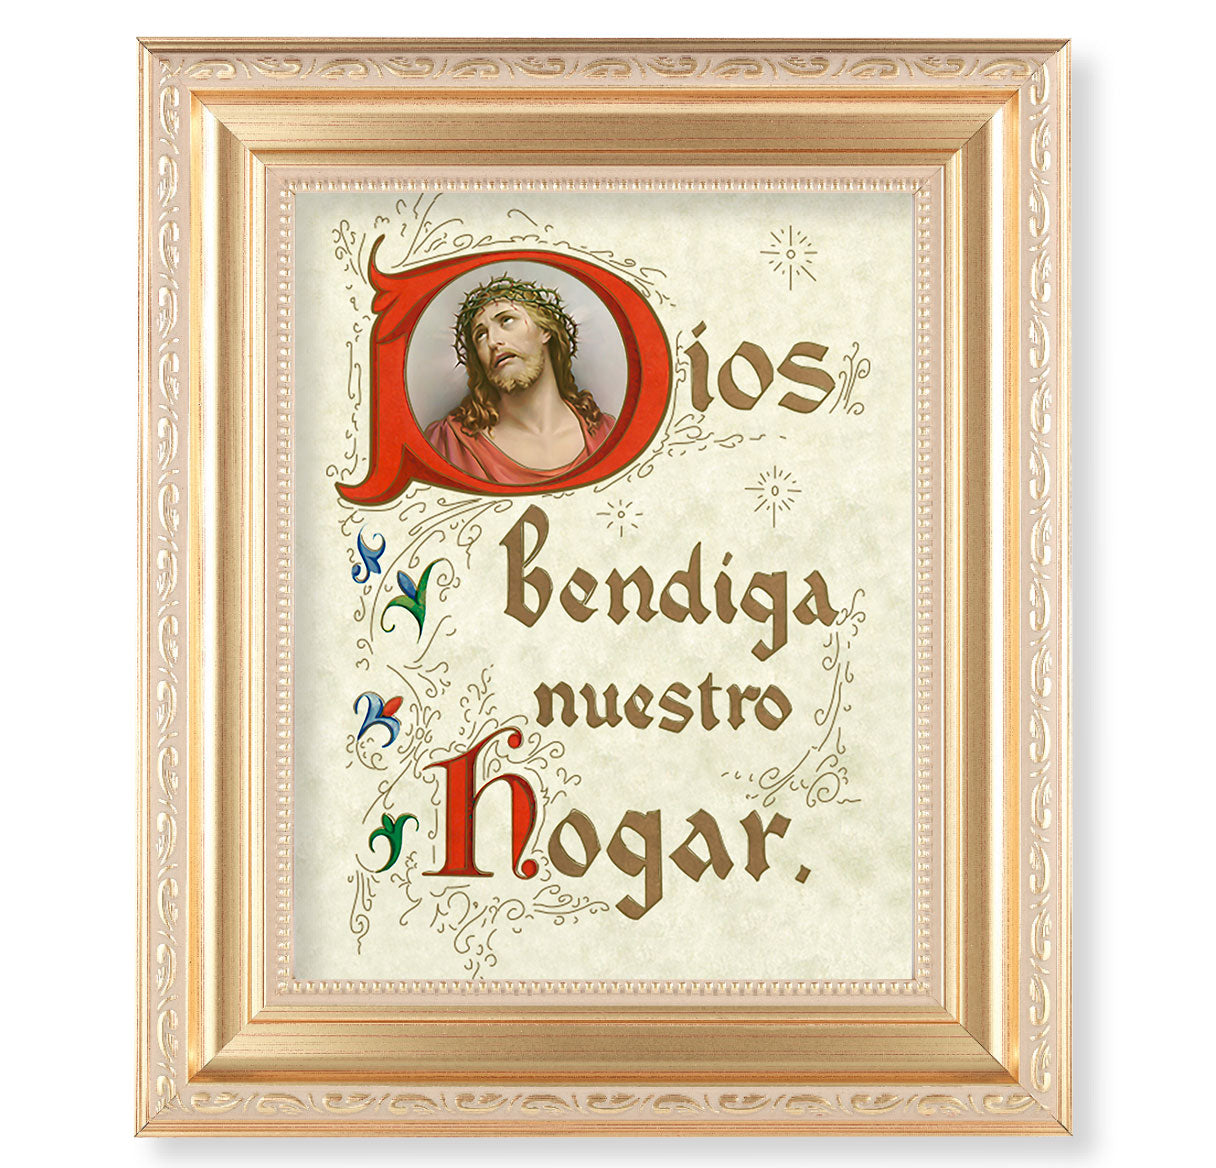 House Blessing (Spanish) Picture Framed Wall Art Decor Large, Satin Gold Fluted Frame with Distressed Finish and Fine Detailed Scrollwork